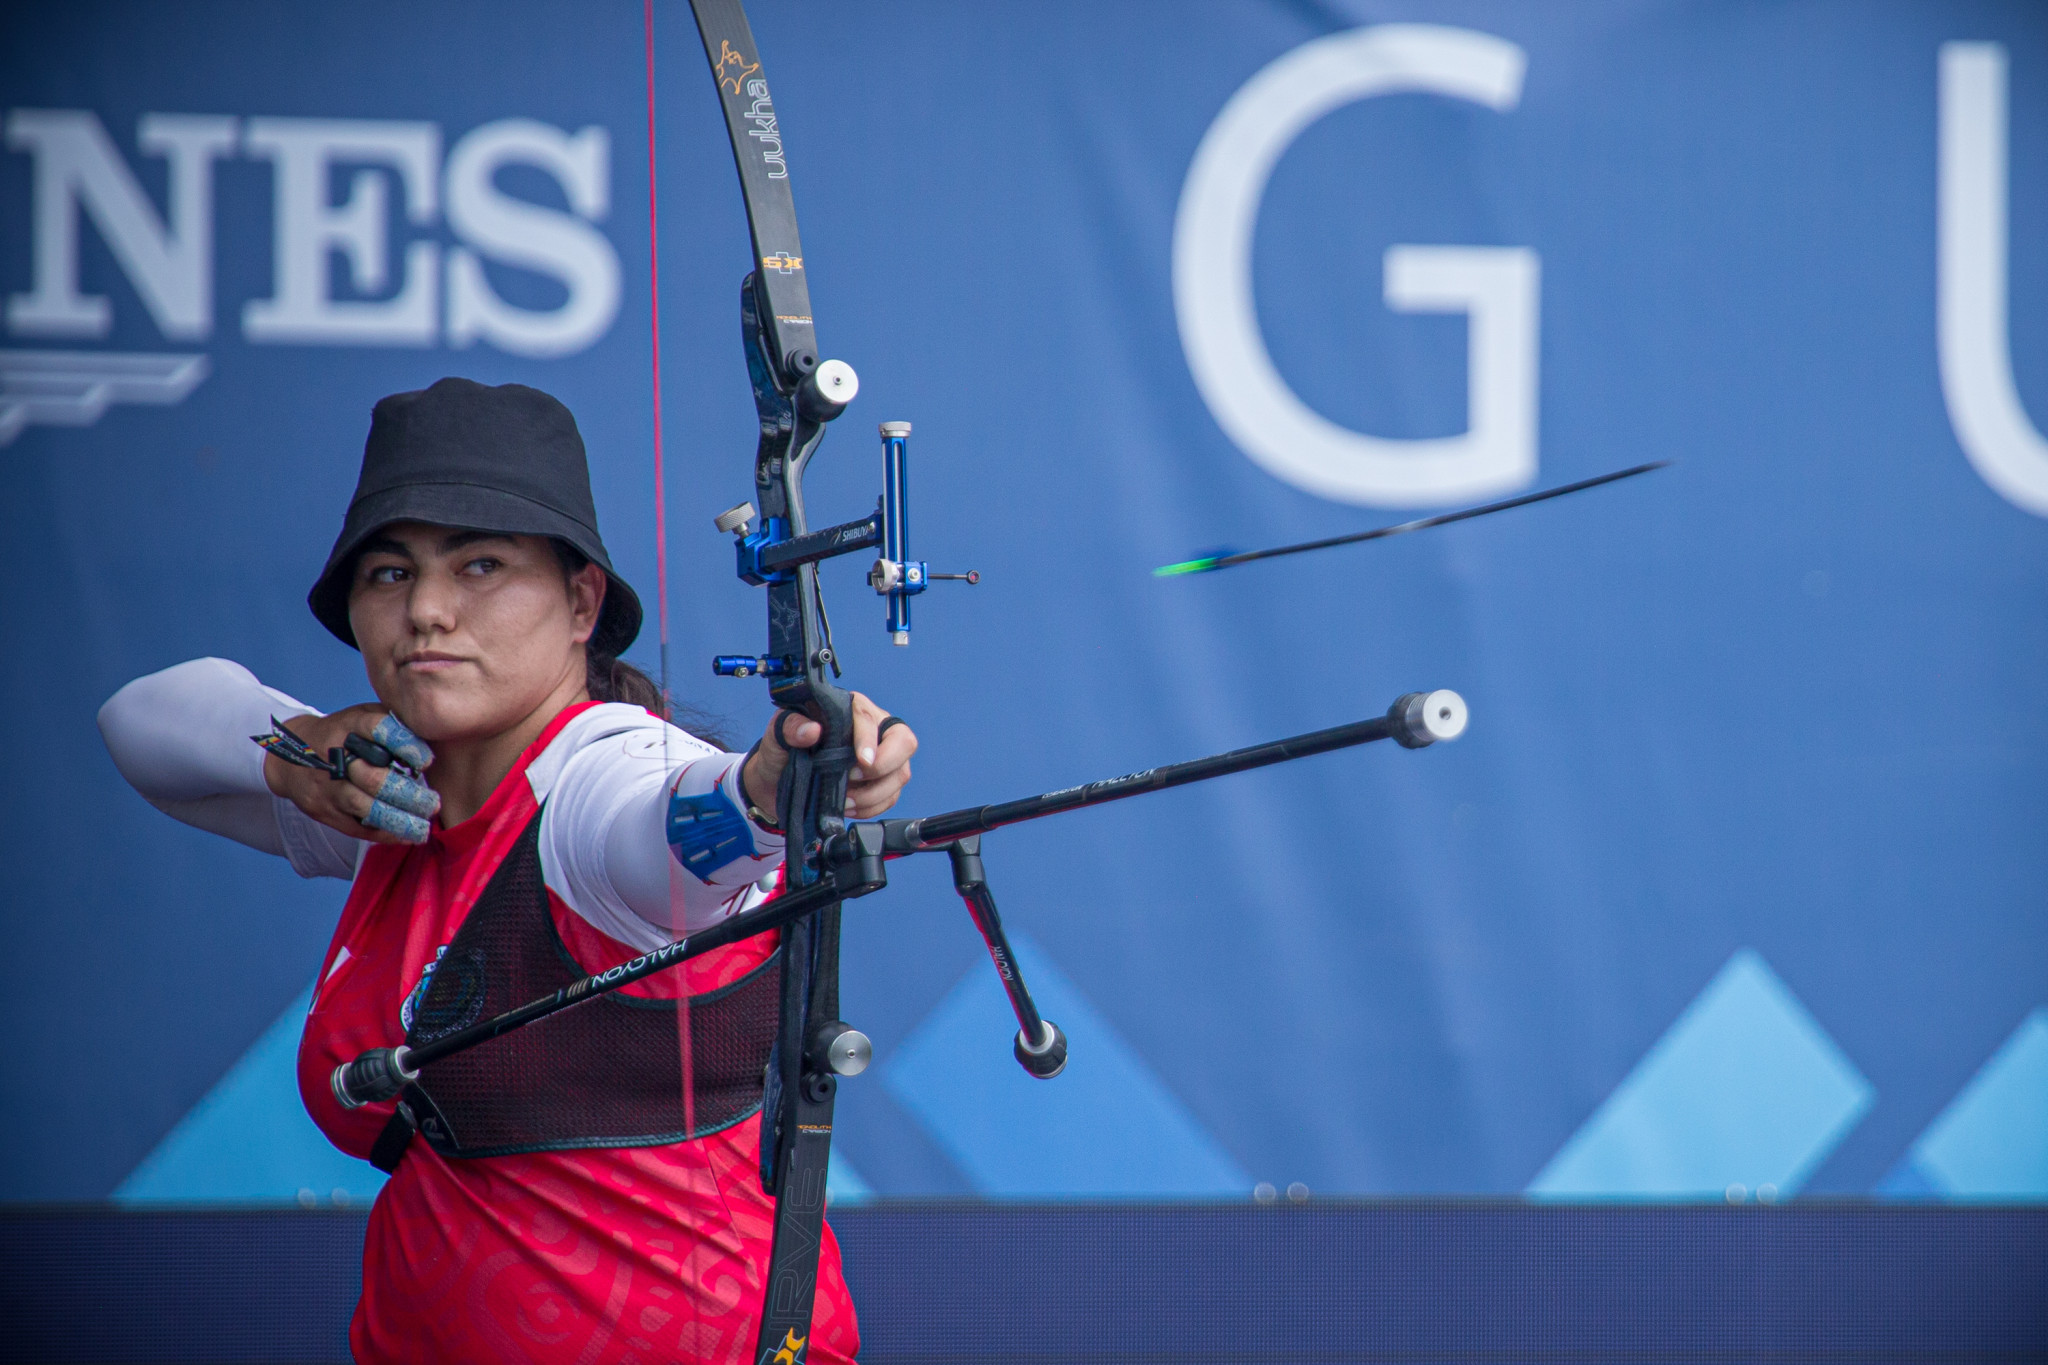 Valencia and Wieser top recurve qualification at Archery World Cup in Paris